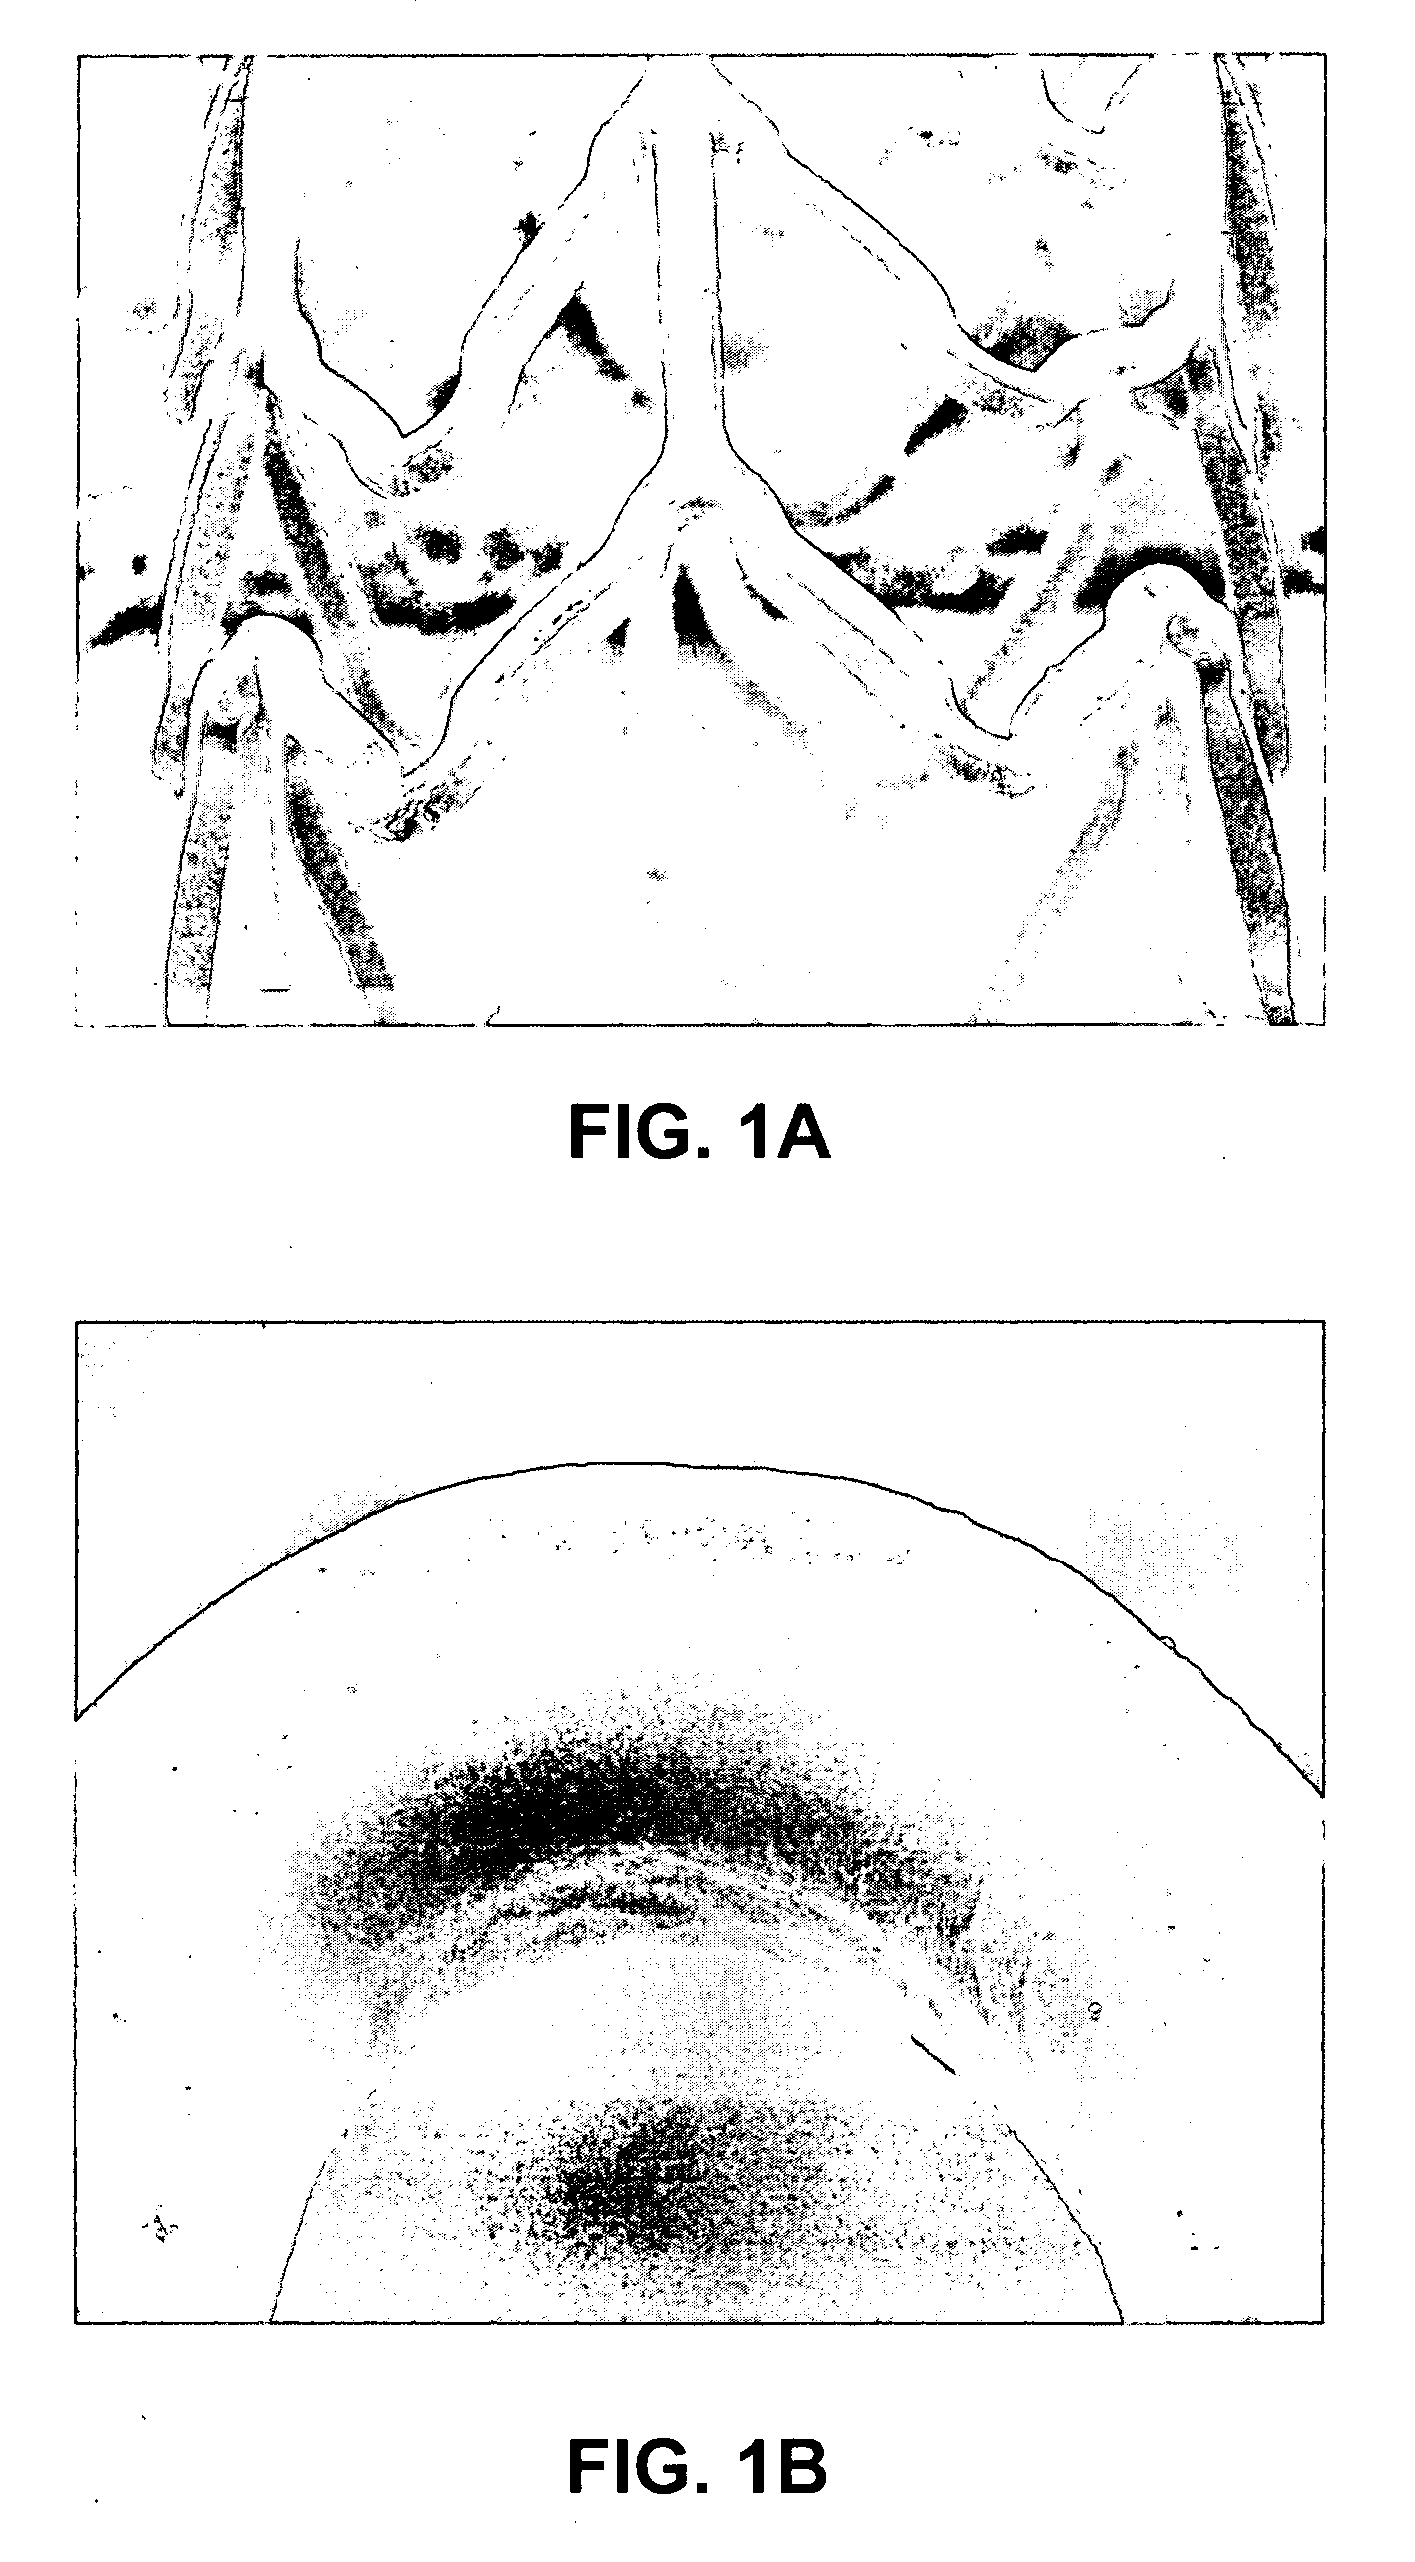 Coatings for implantable medical devices comprising hydrophilic substances and methods for fabricating the same